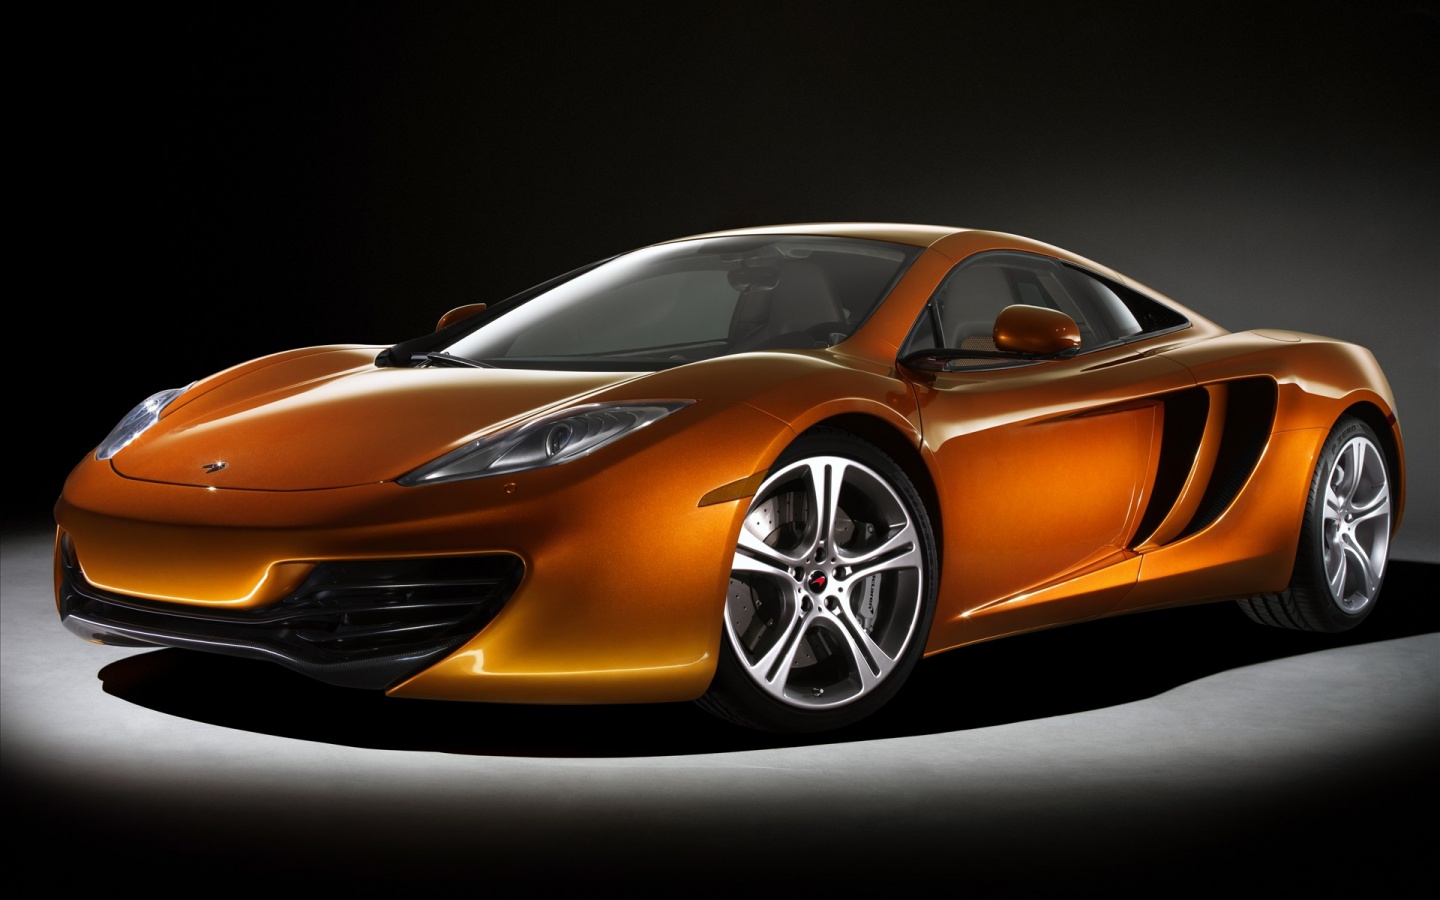 Mclaren Mp4 12c Gt3 Sport Car Review 2011 And Pictures